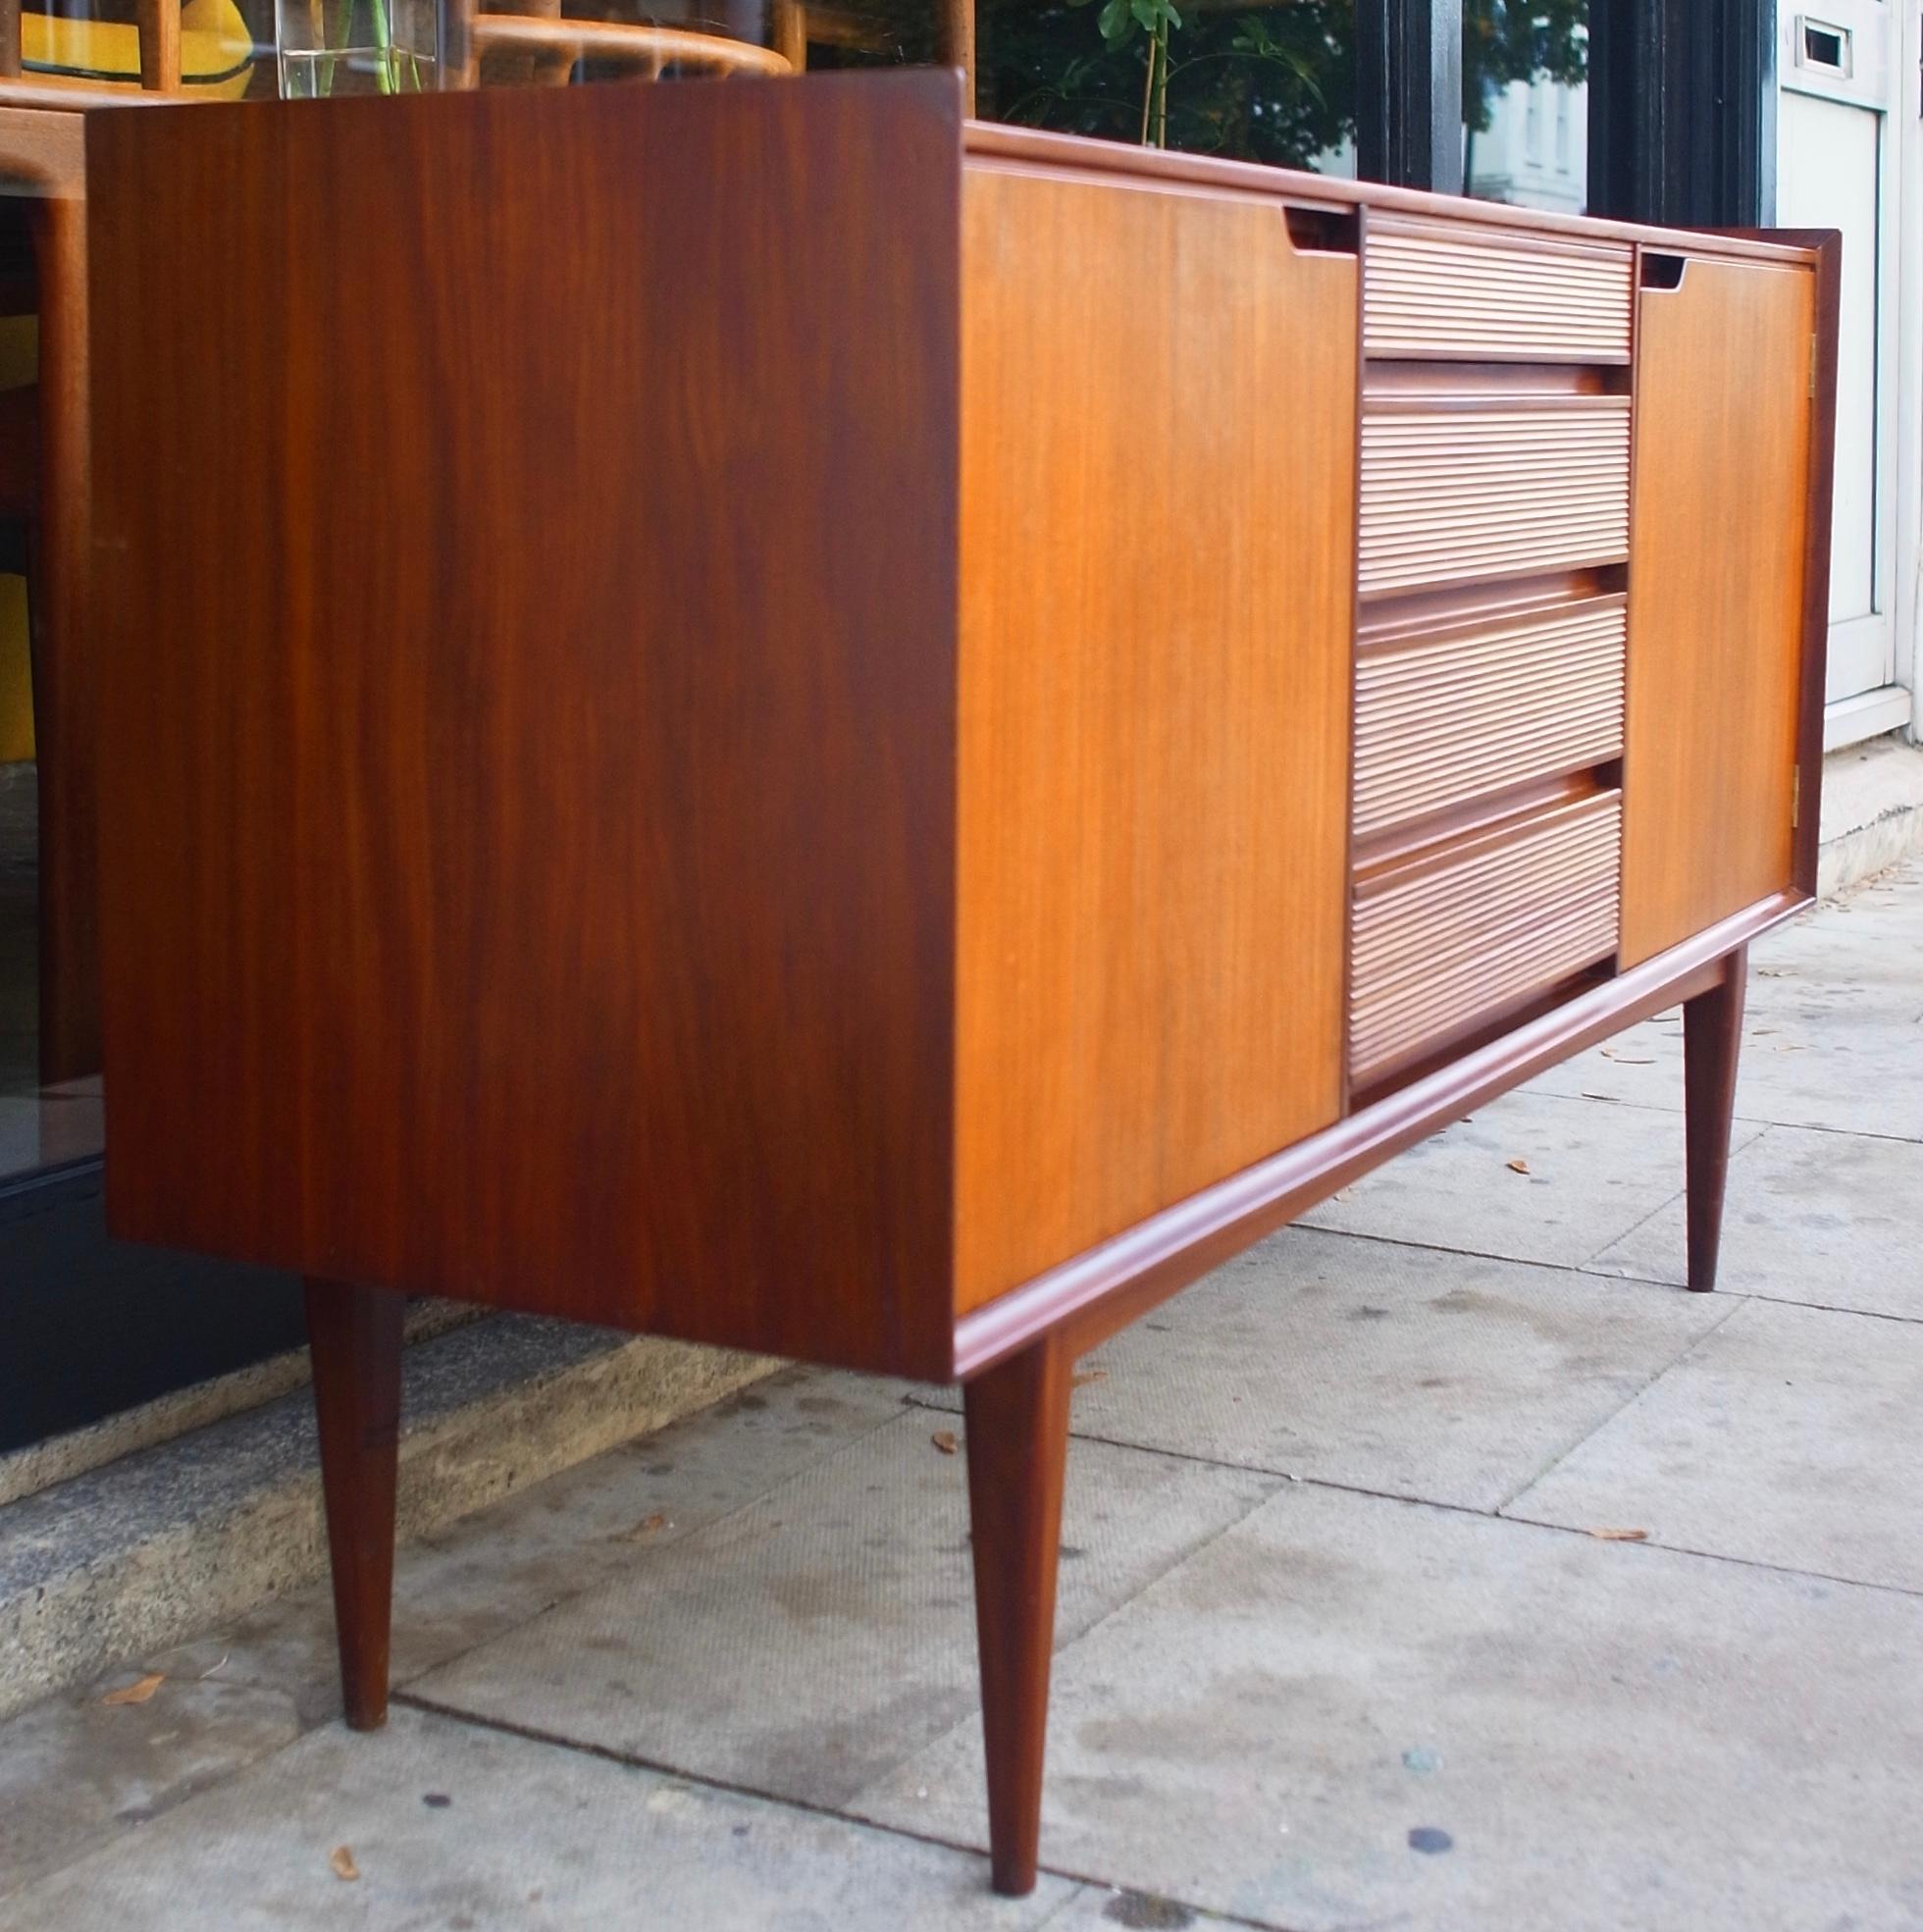 British mid-century Afromosia Teak Sideboard by Richard Hornby for Fyne Ladye in the 1960s and retailed through Heals. Superb craftsmanship throughout, carved from solid from Afrormosia with beautiful cutaway handle detail, reeded drawer fronts and